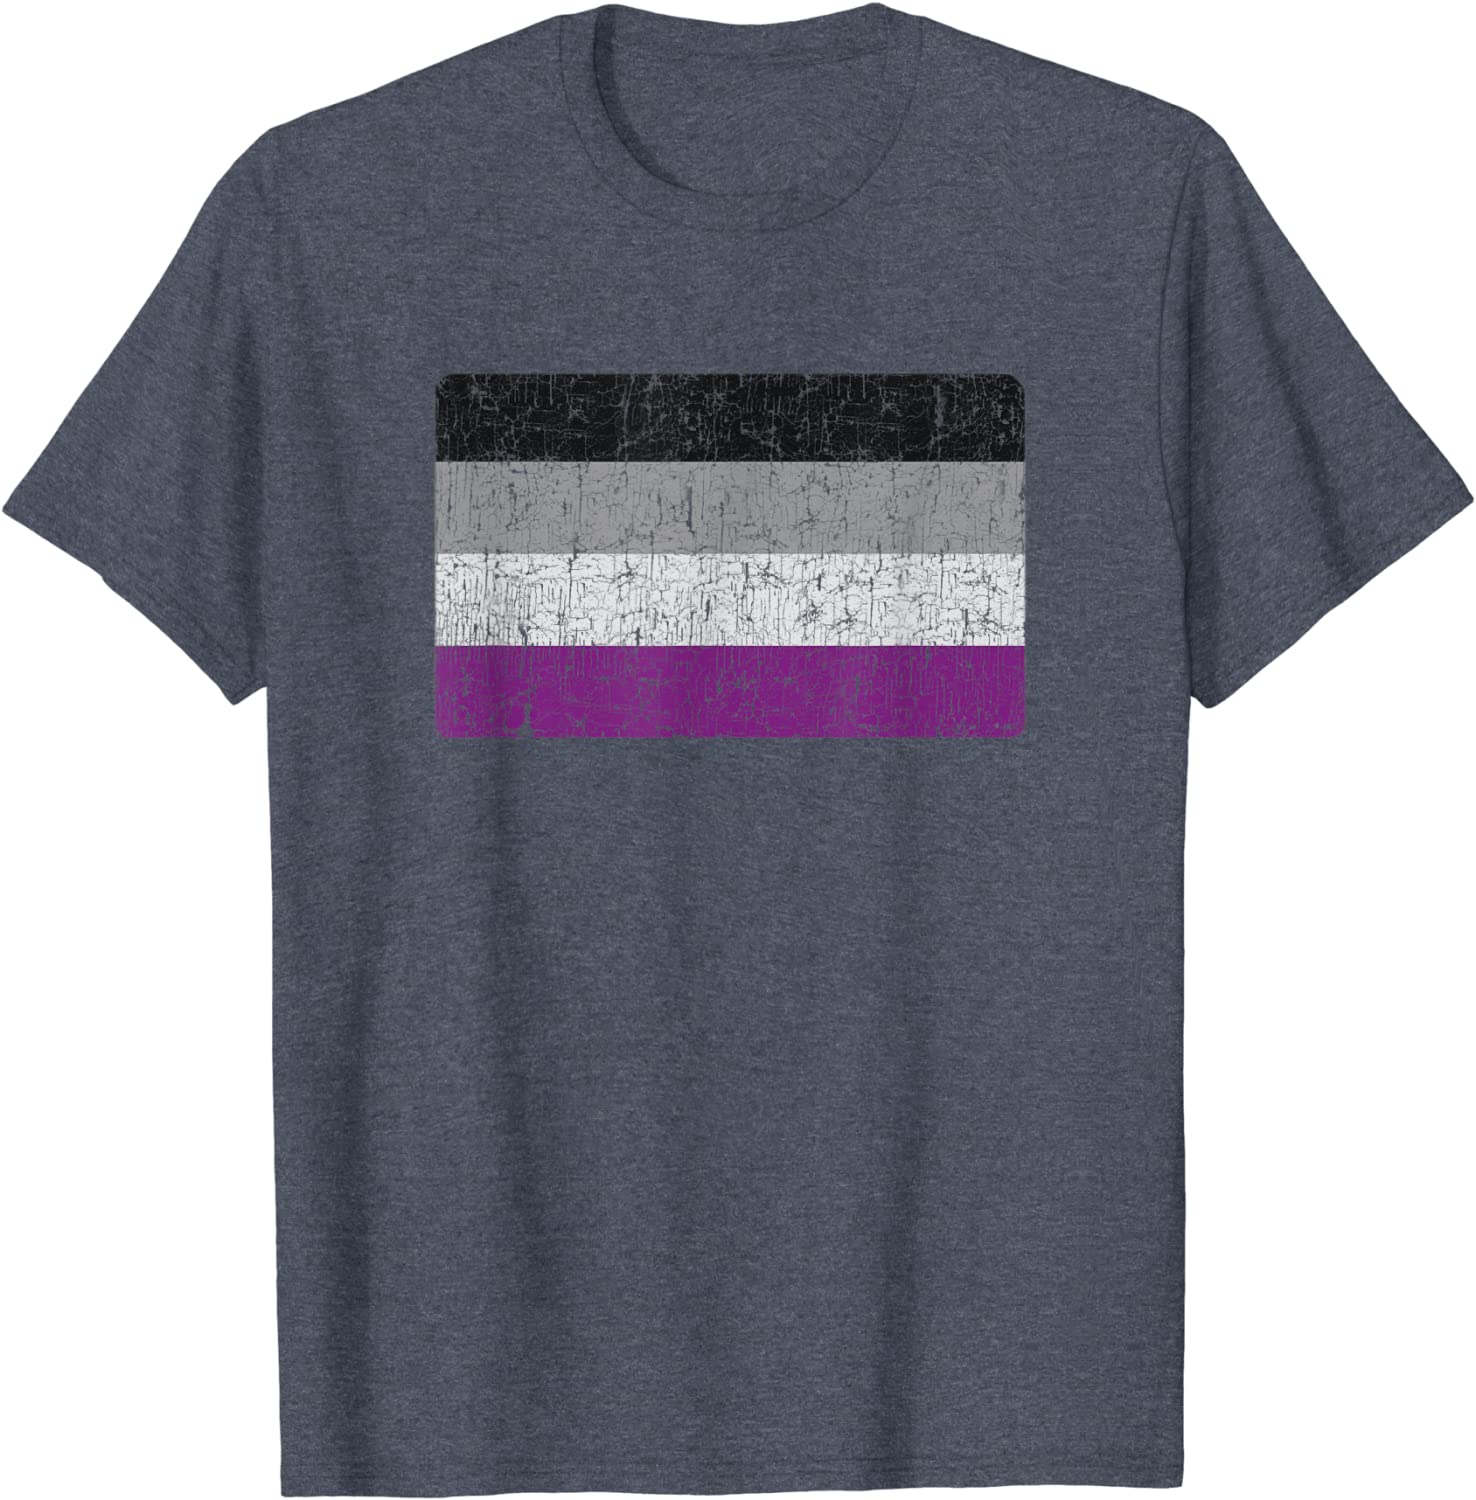 There are things people Learn about the Asexual Pride Flag